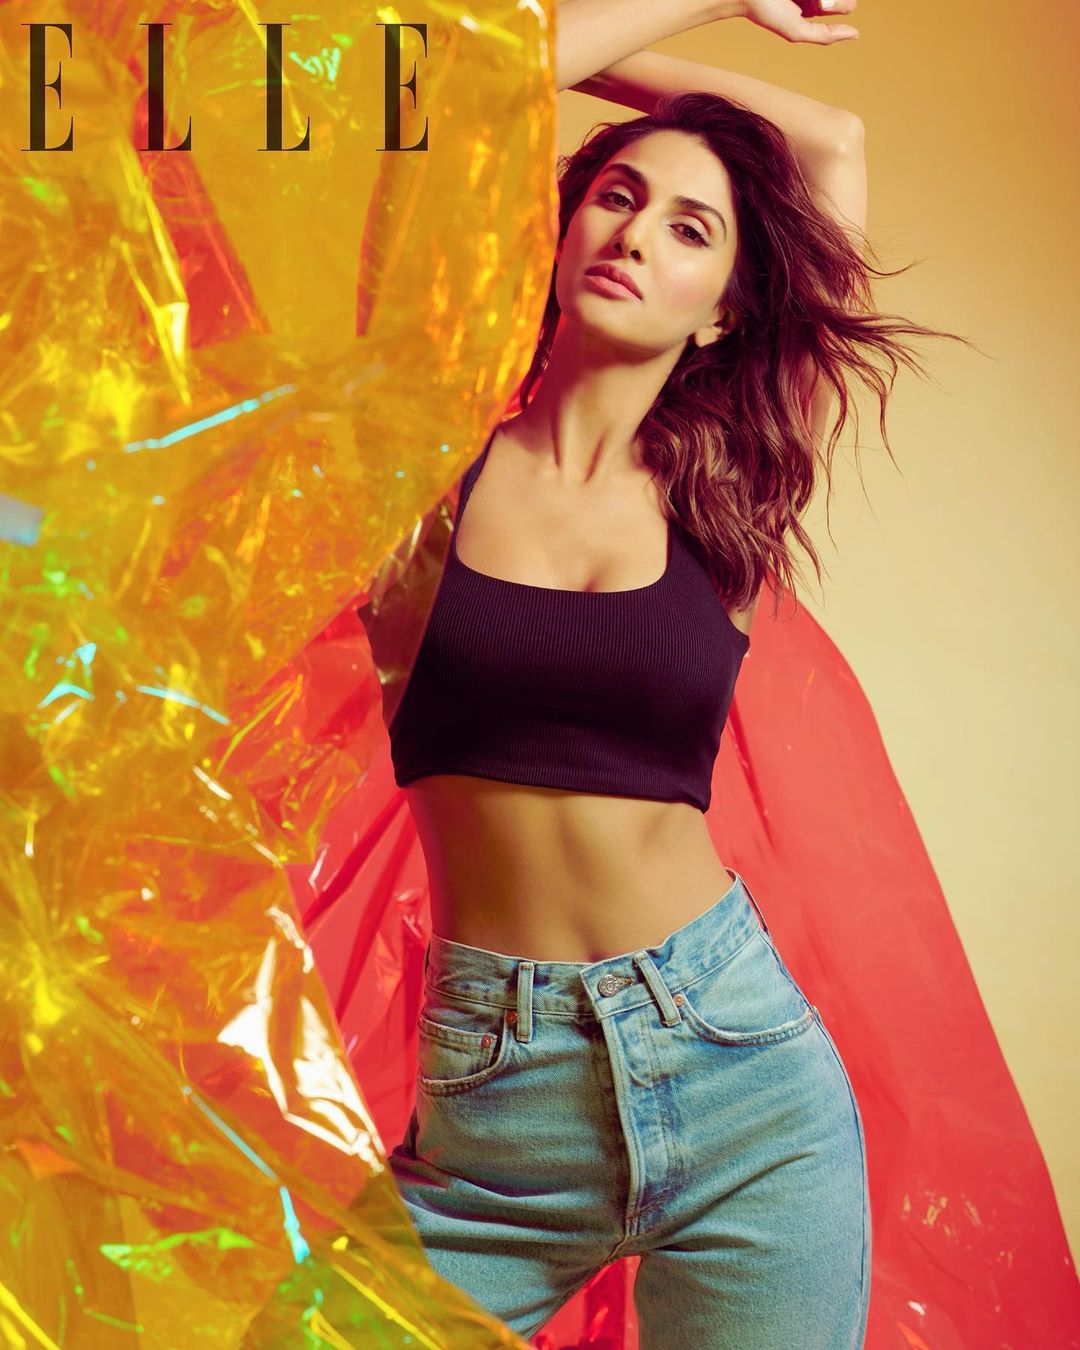 Bani Kapoor Sex - Vaani Kapoor Flaunts Uber Sexy Body As Cover Star For Fashion Magazine, See  Diva's Hottest Pics